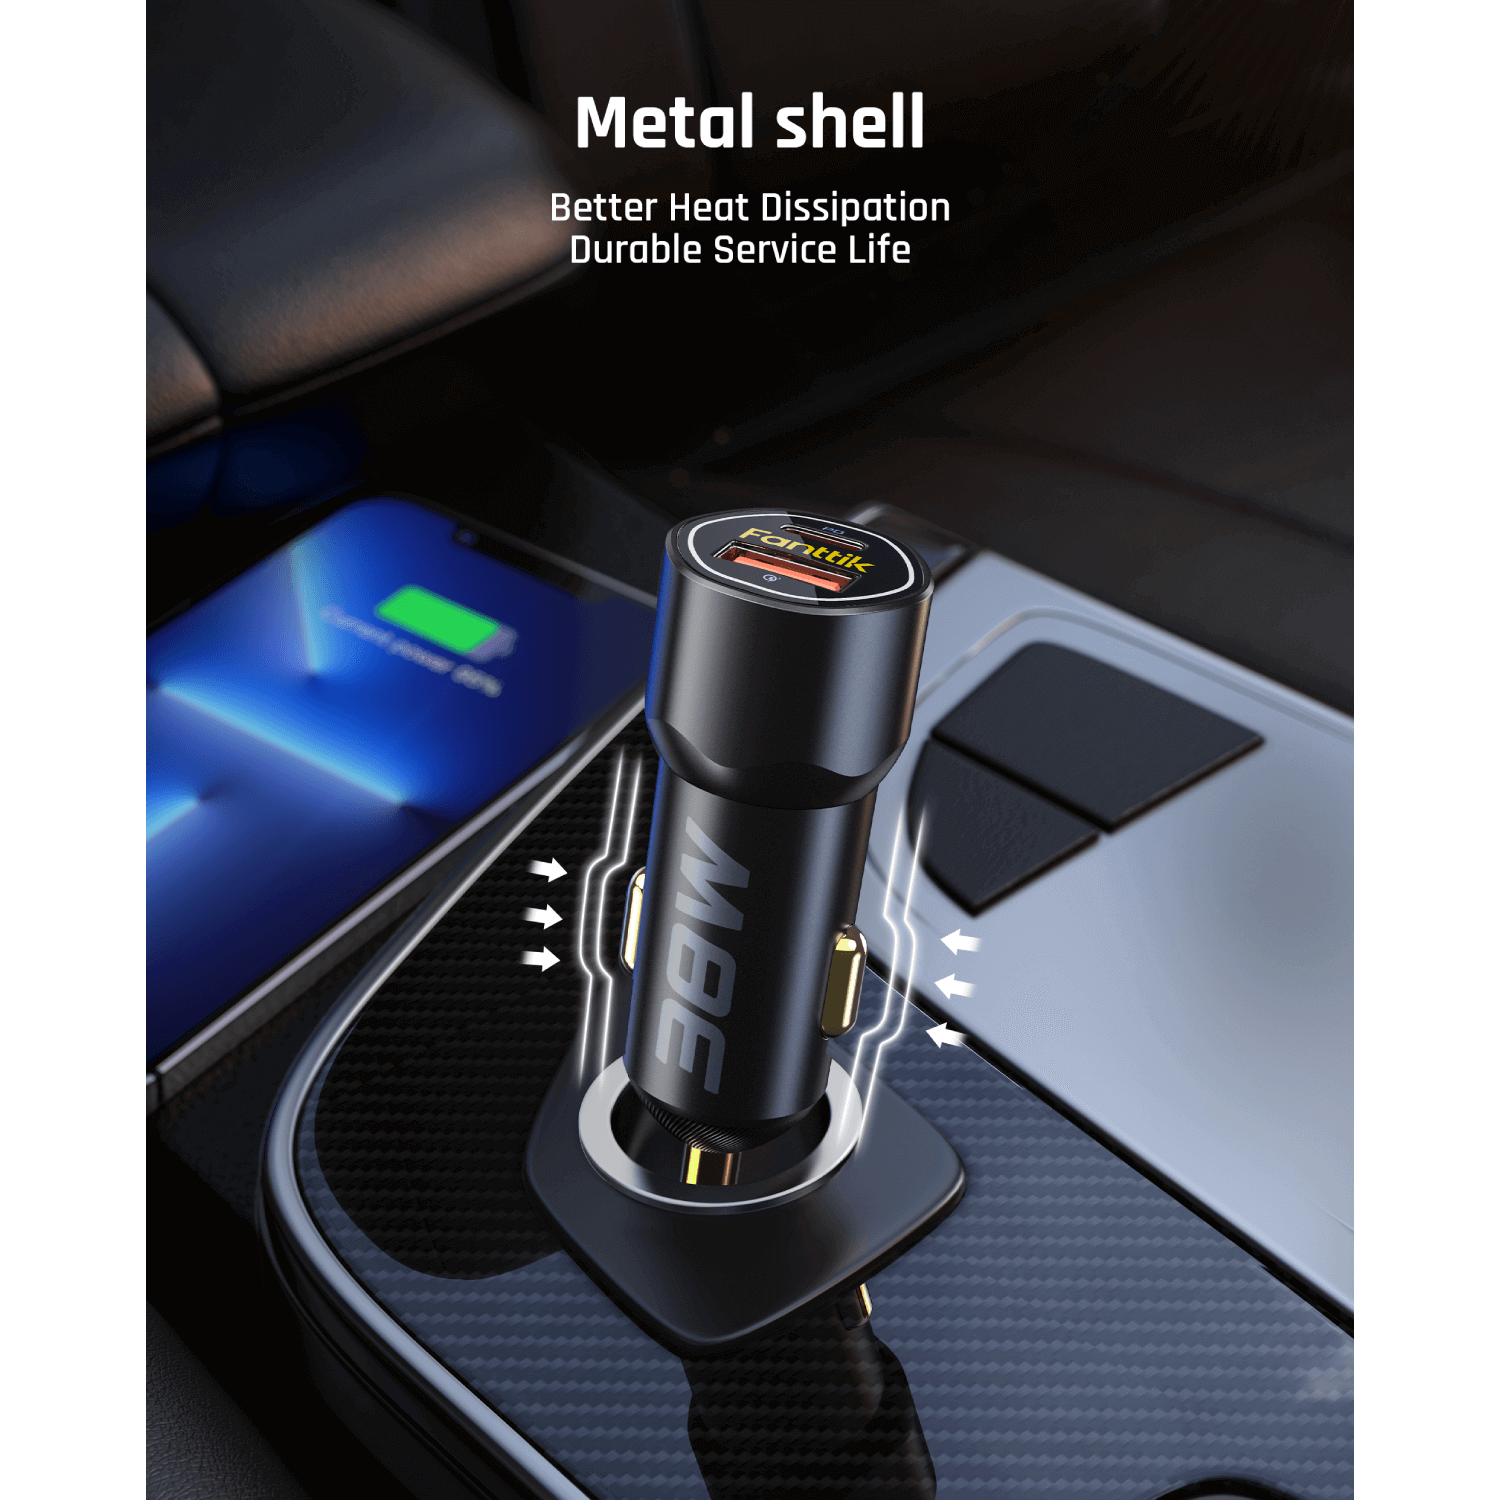 Car Cigarette Lighter USB Chargers The Convenient Solution for Charging Devices on the Go